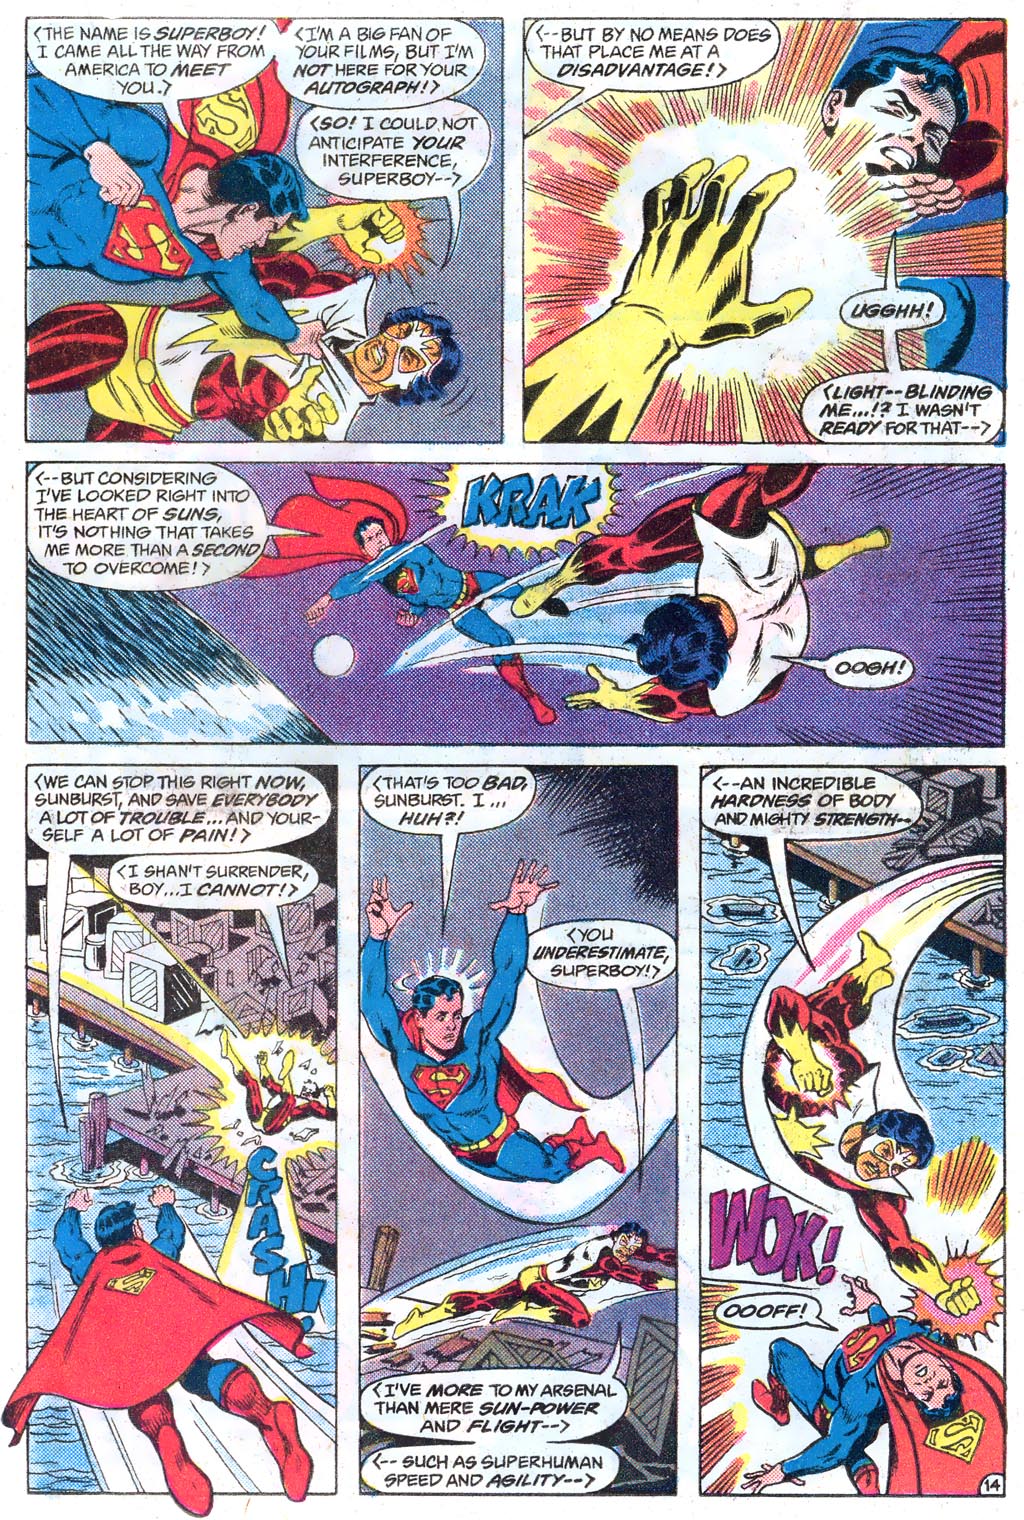 The New Adventures of Superboy 45 Page 18